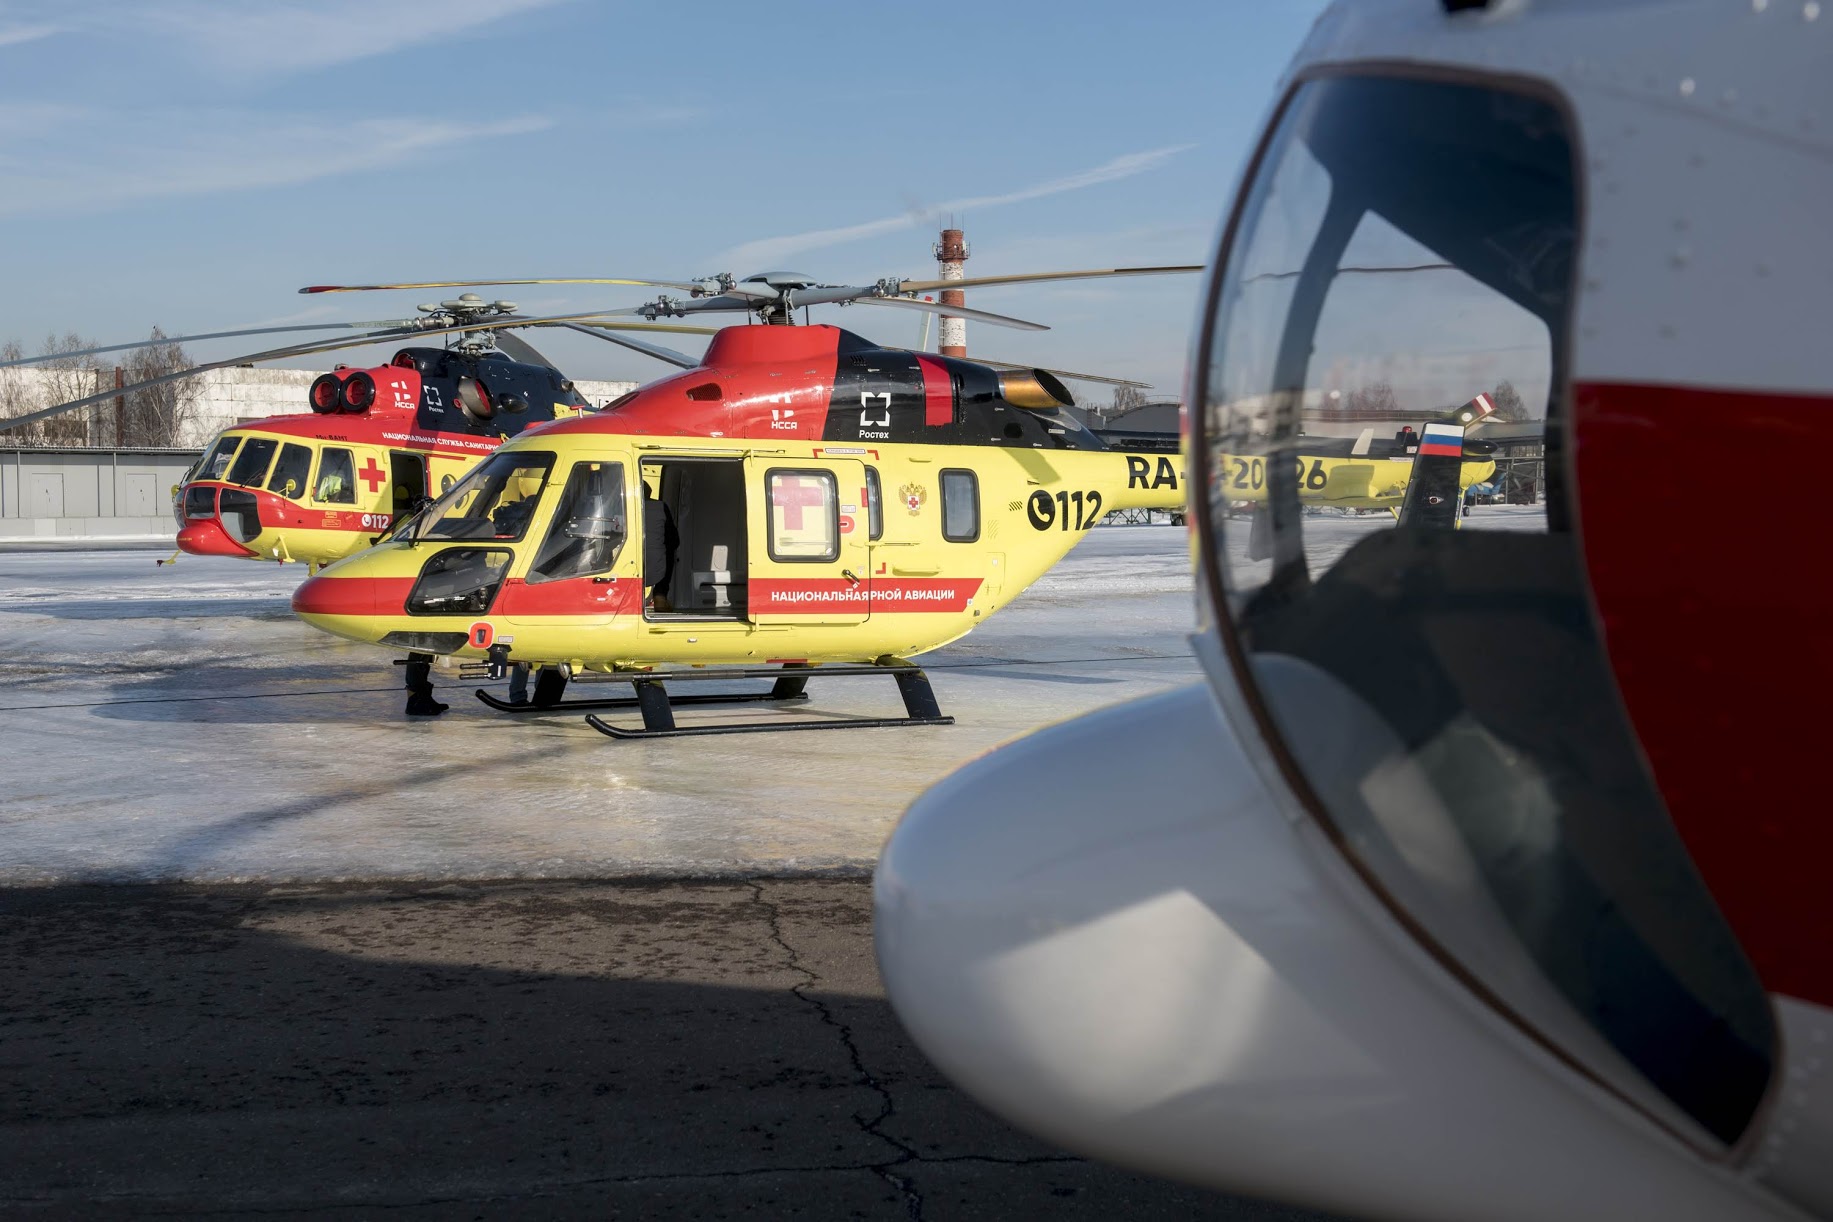 Rostec’s Air Ambulance has Saved more than 11,000 People in a Year